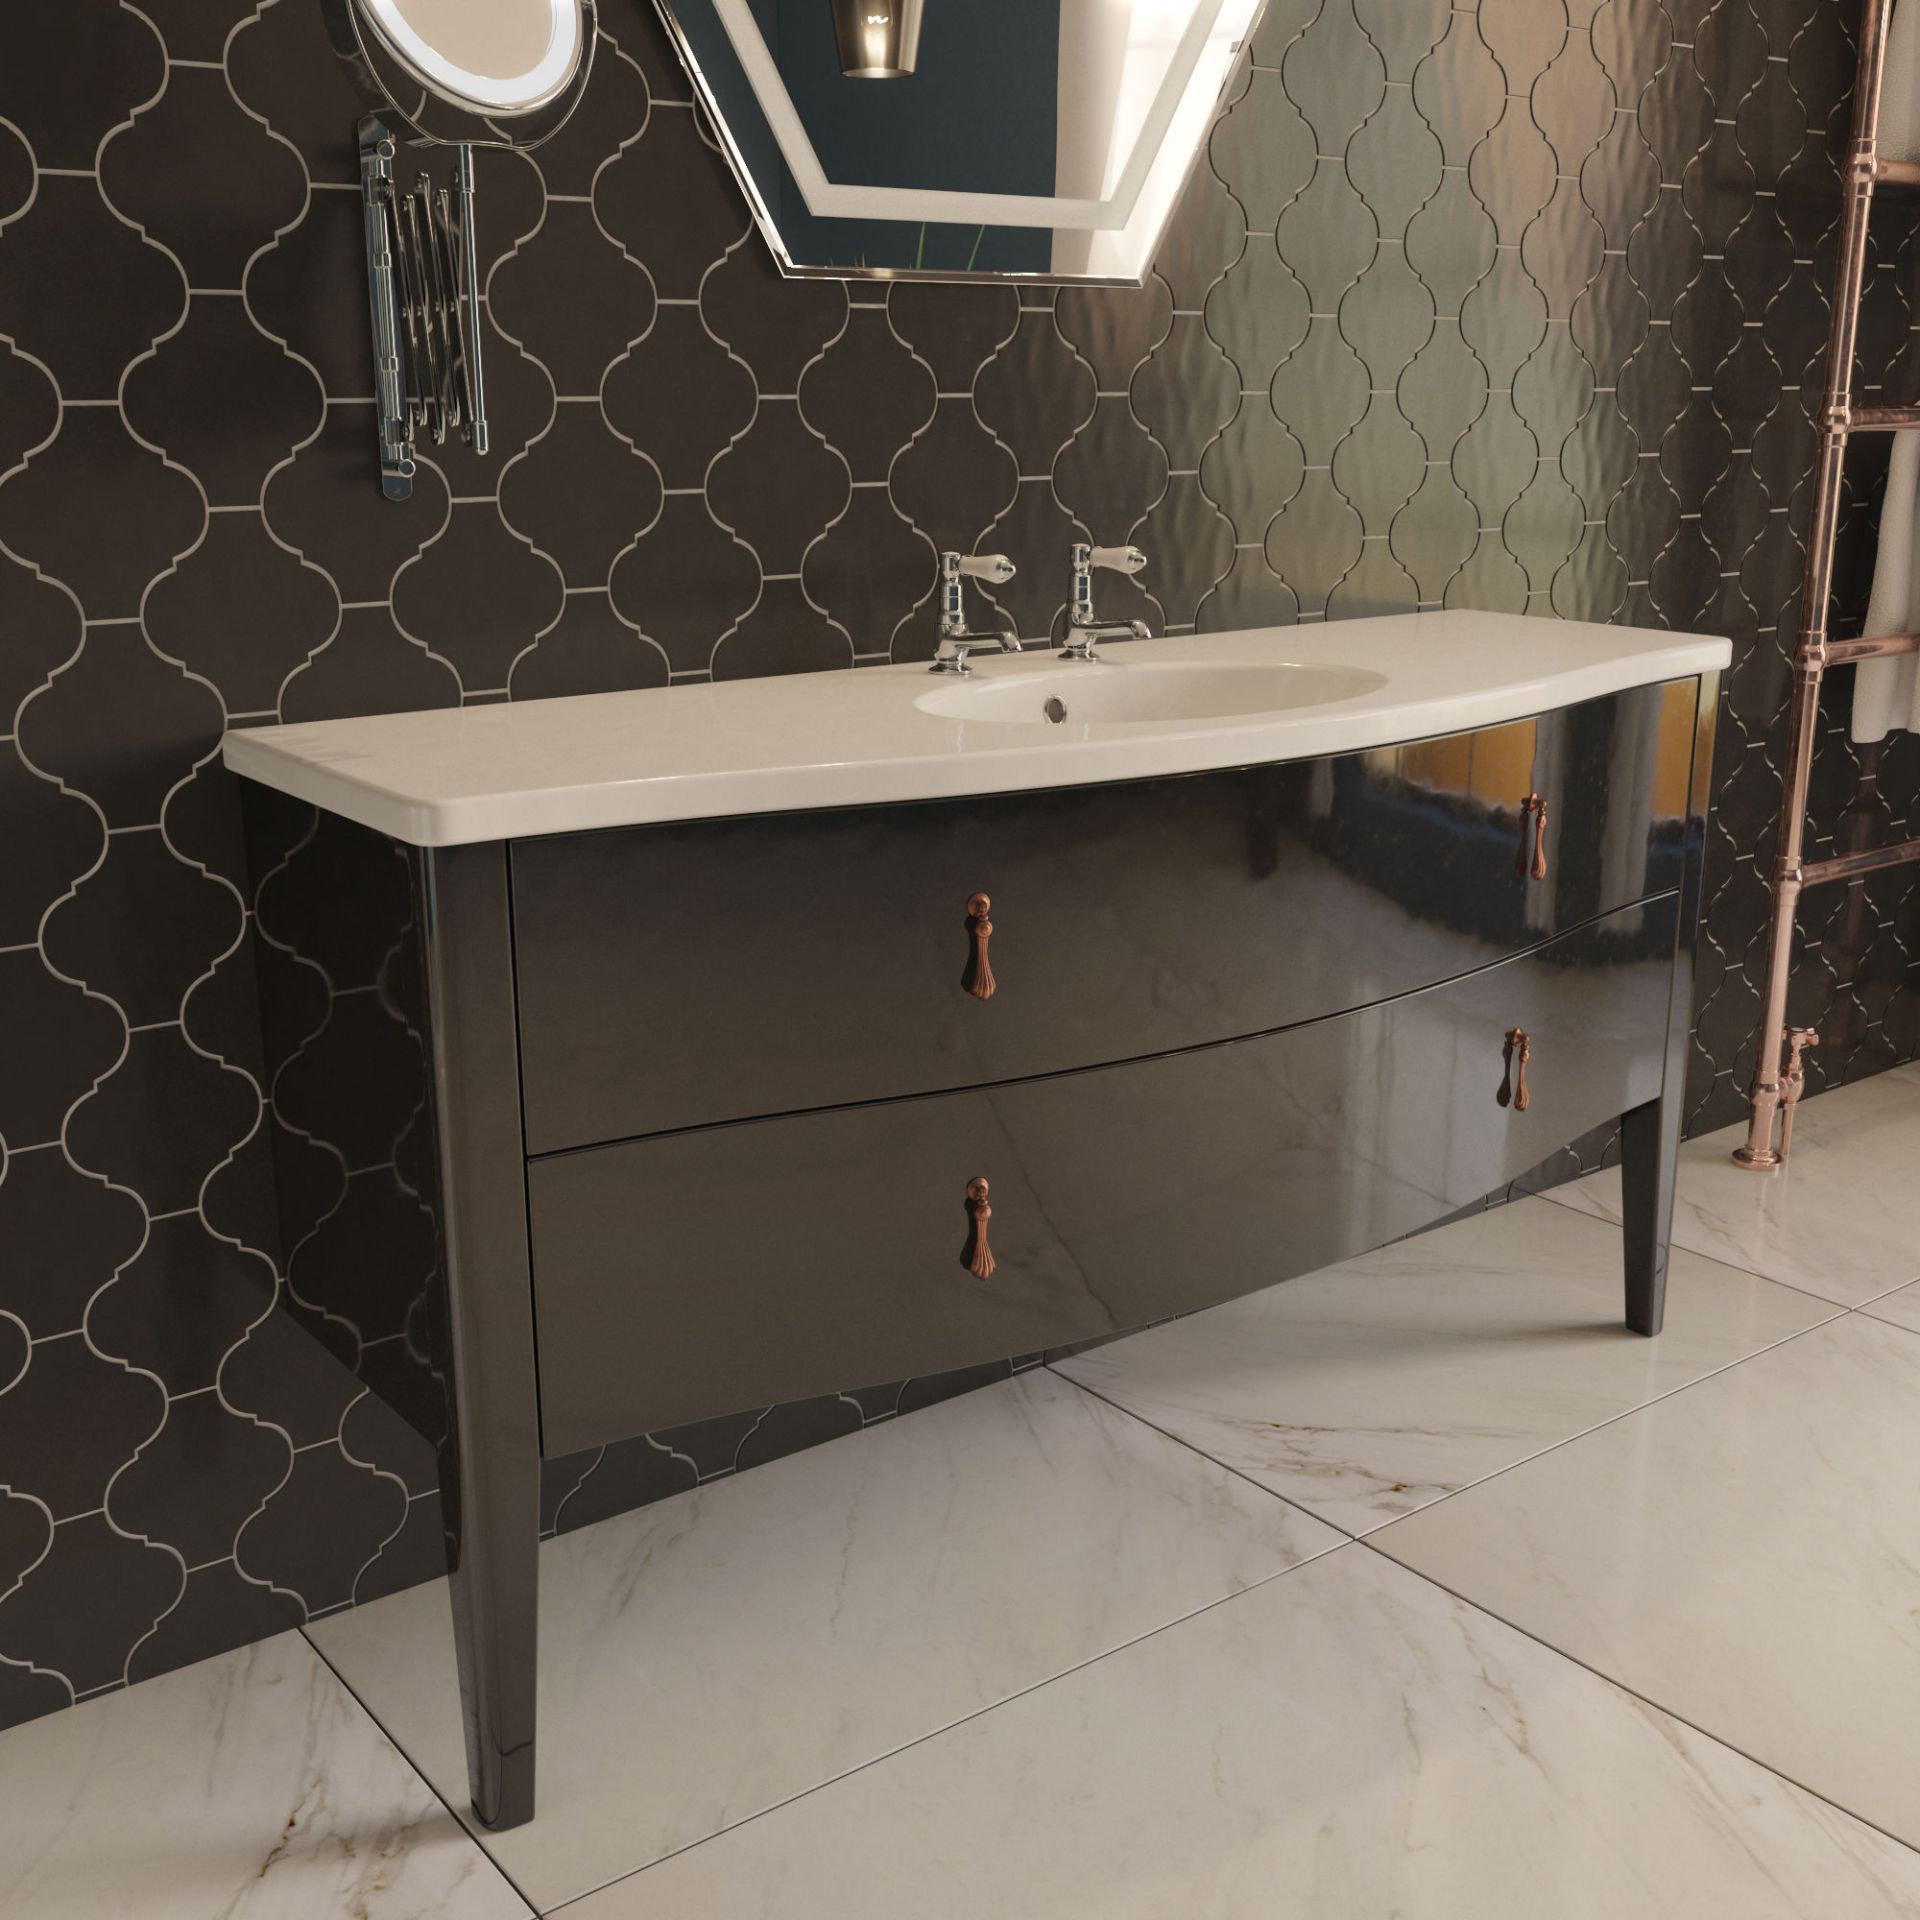 (KL2) Antoinette Vanity Unit. Comes complete with basin. Add a touch of glamour with this Art Deco